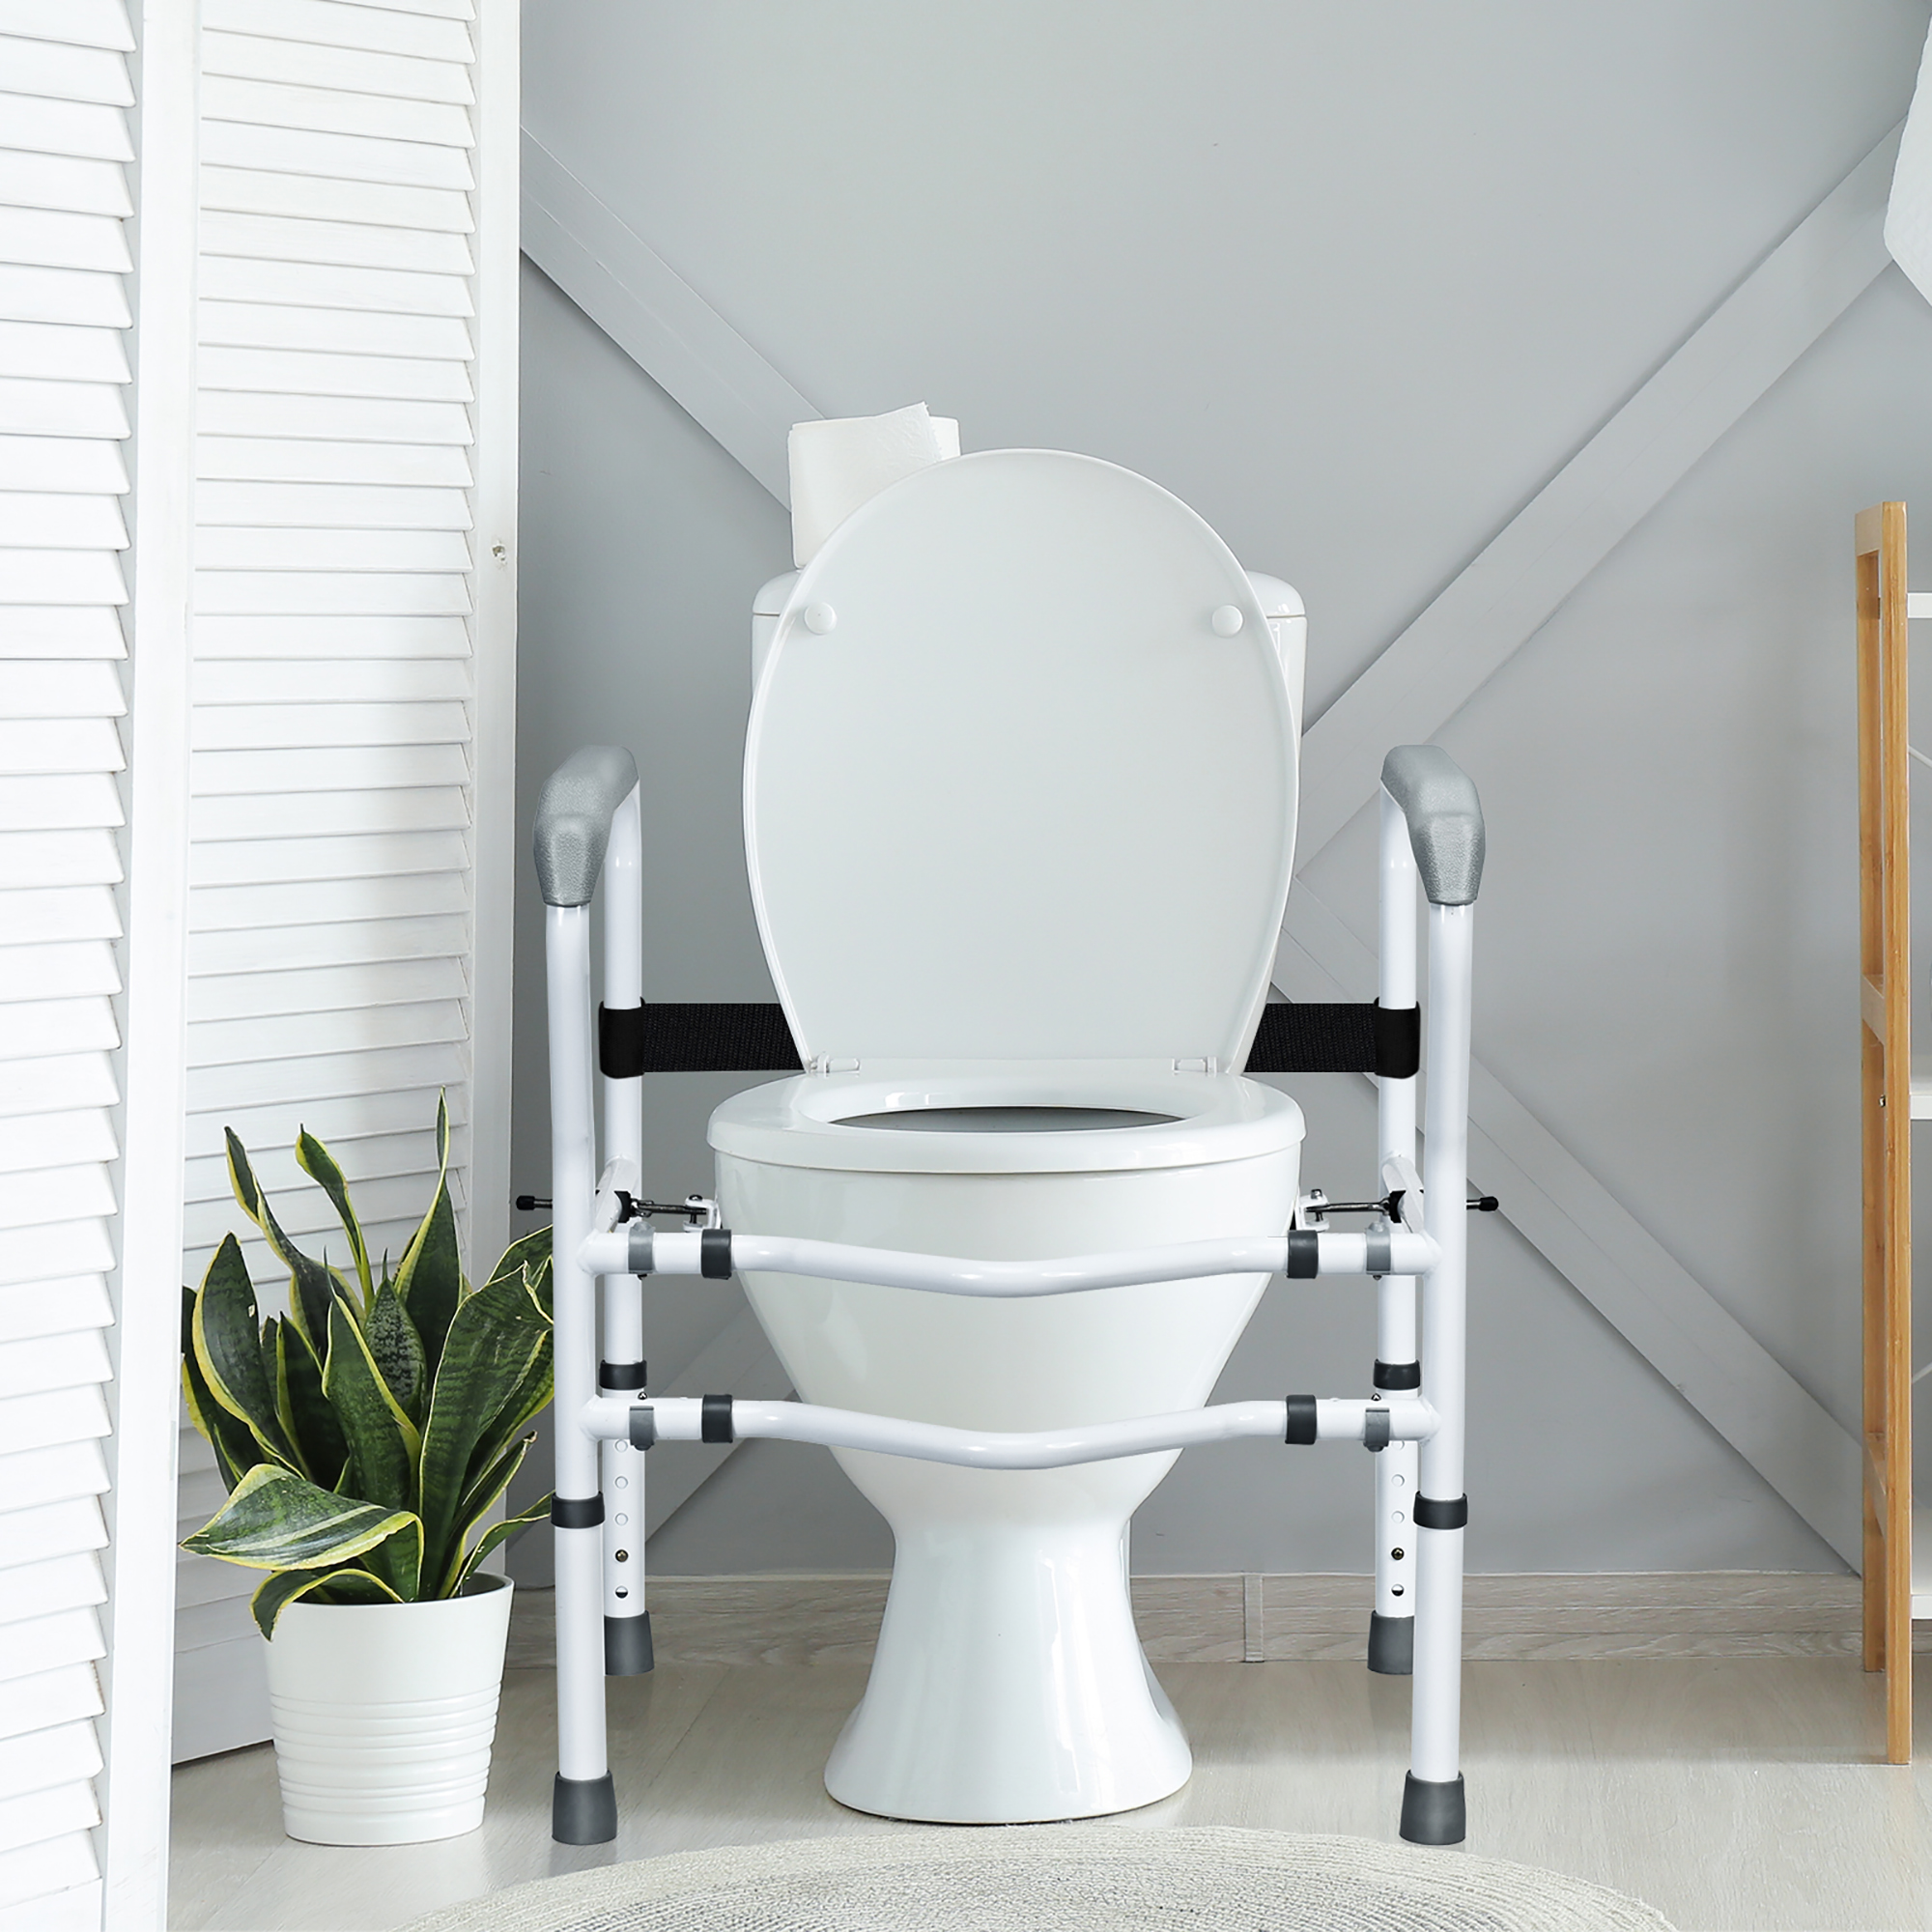 Costway Toilet Safety Frame Stand Alone Toilet Safety Rail with Adjustable Height & Width